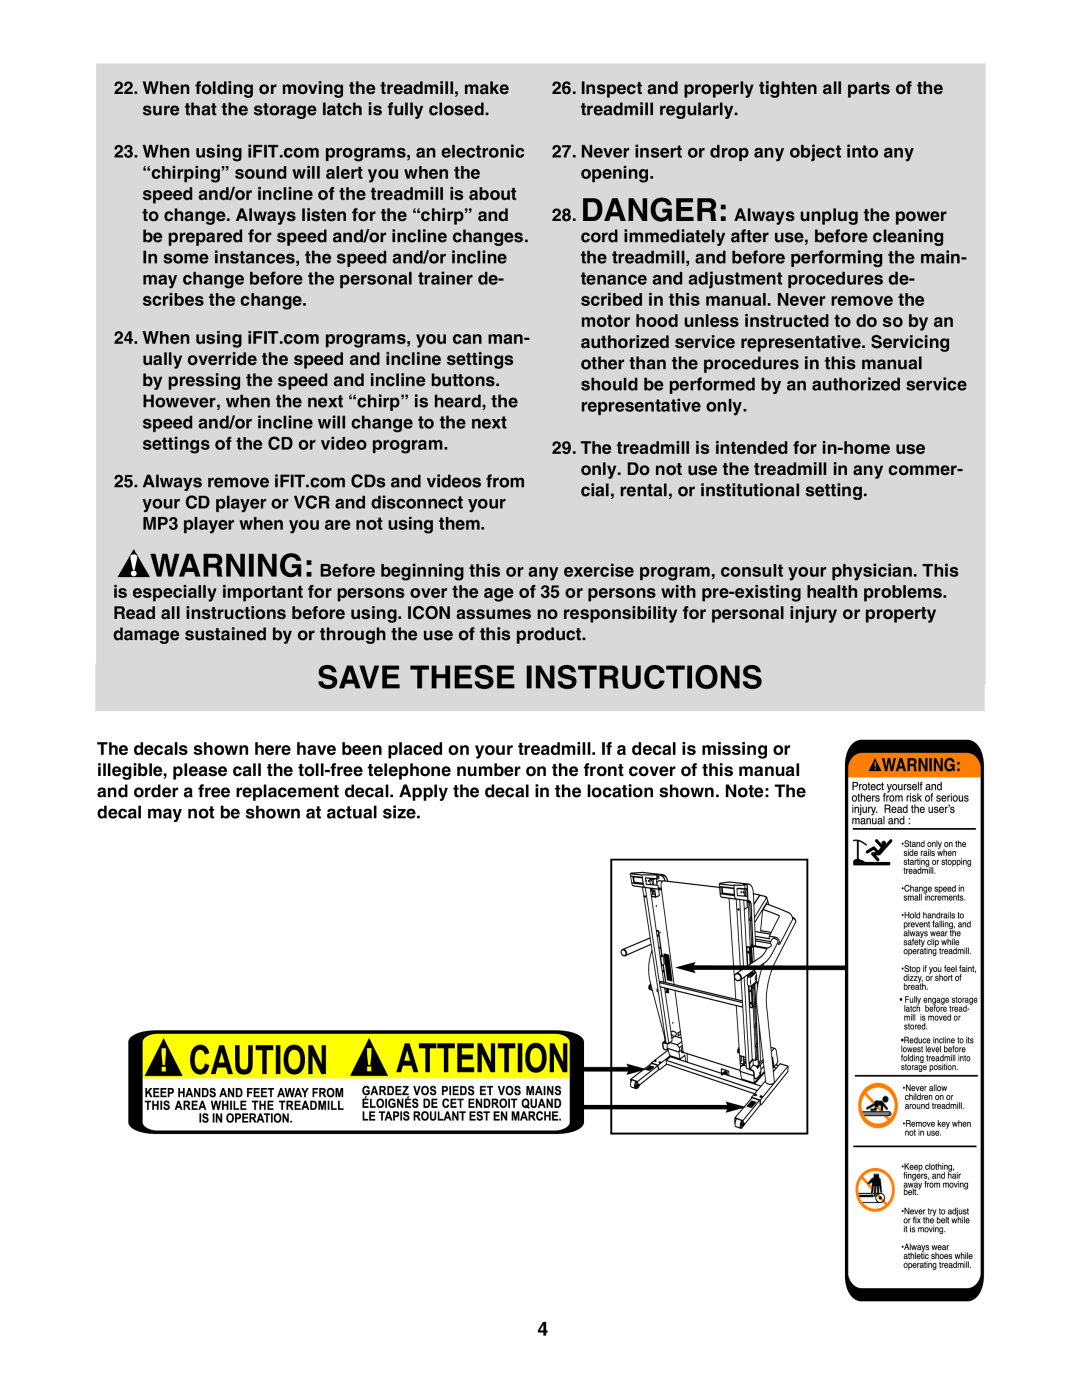 NordicTrack 30600.0 user manual Save These Instructions 